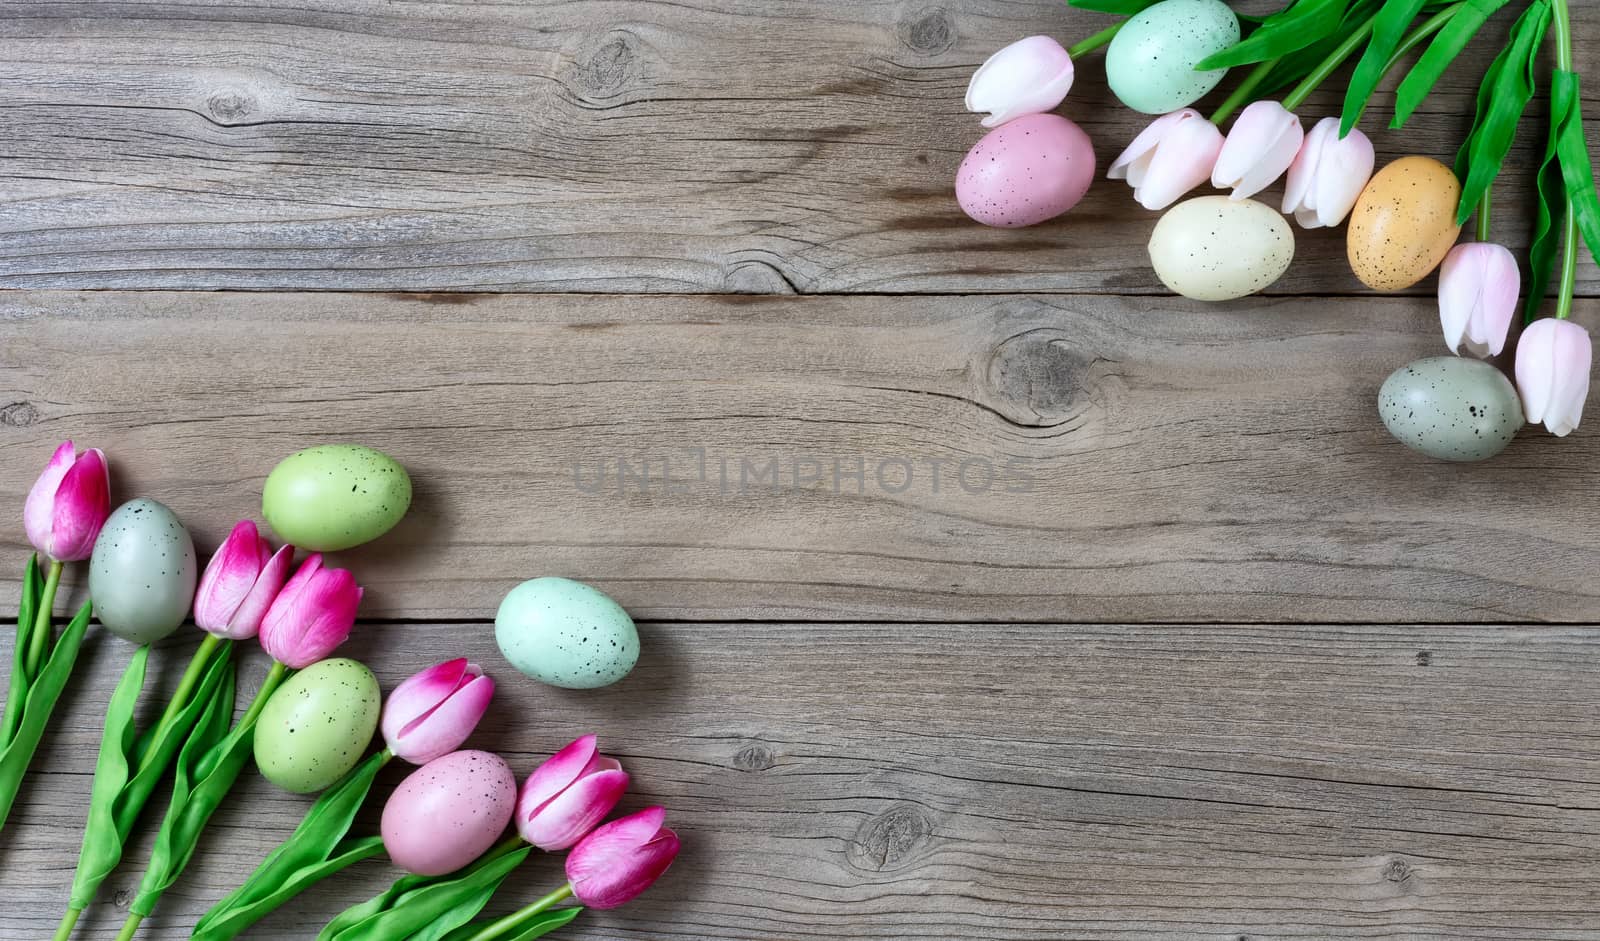 Tulips and Colorful eggs for Easter on Rustic wooden background  by tab1962